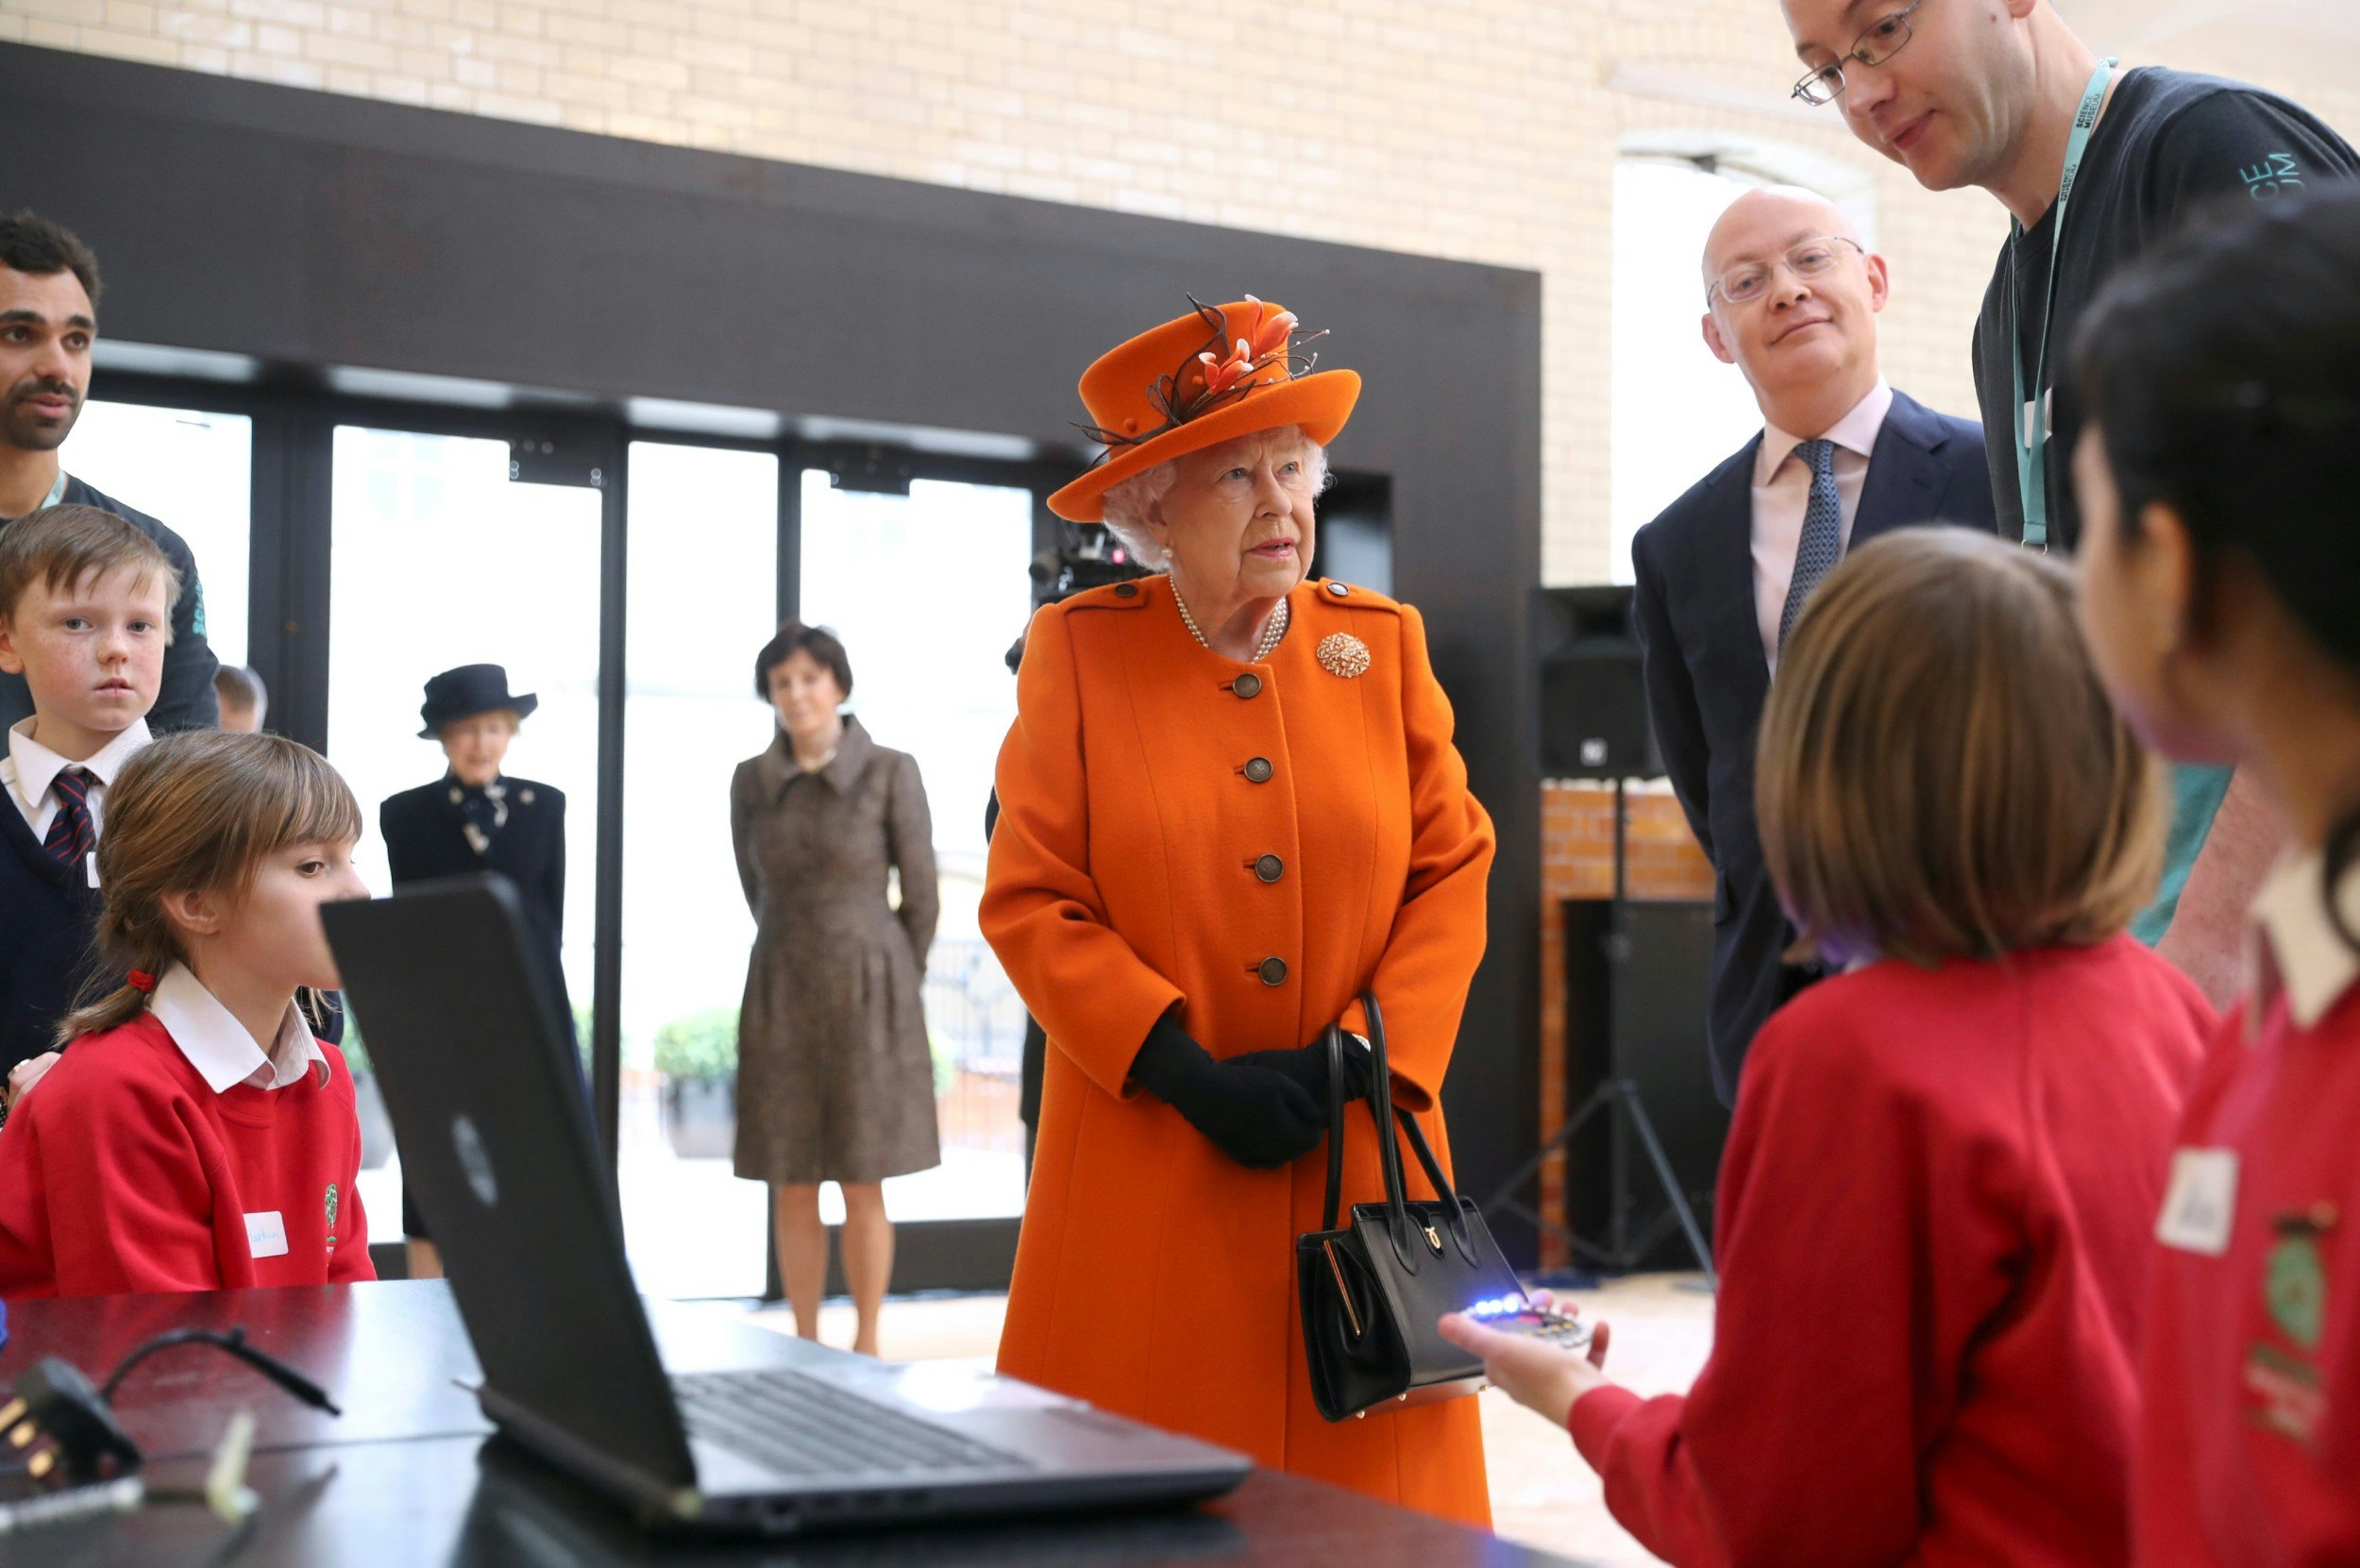 Queen Elizabeth II speaks with children about computer programming during a visit to the Science Museum